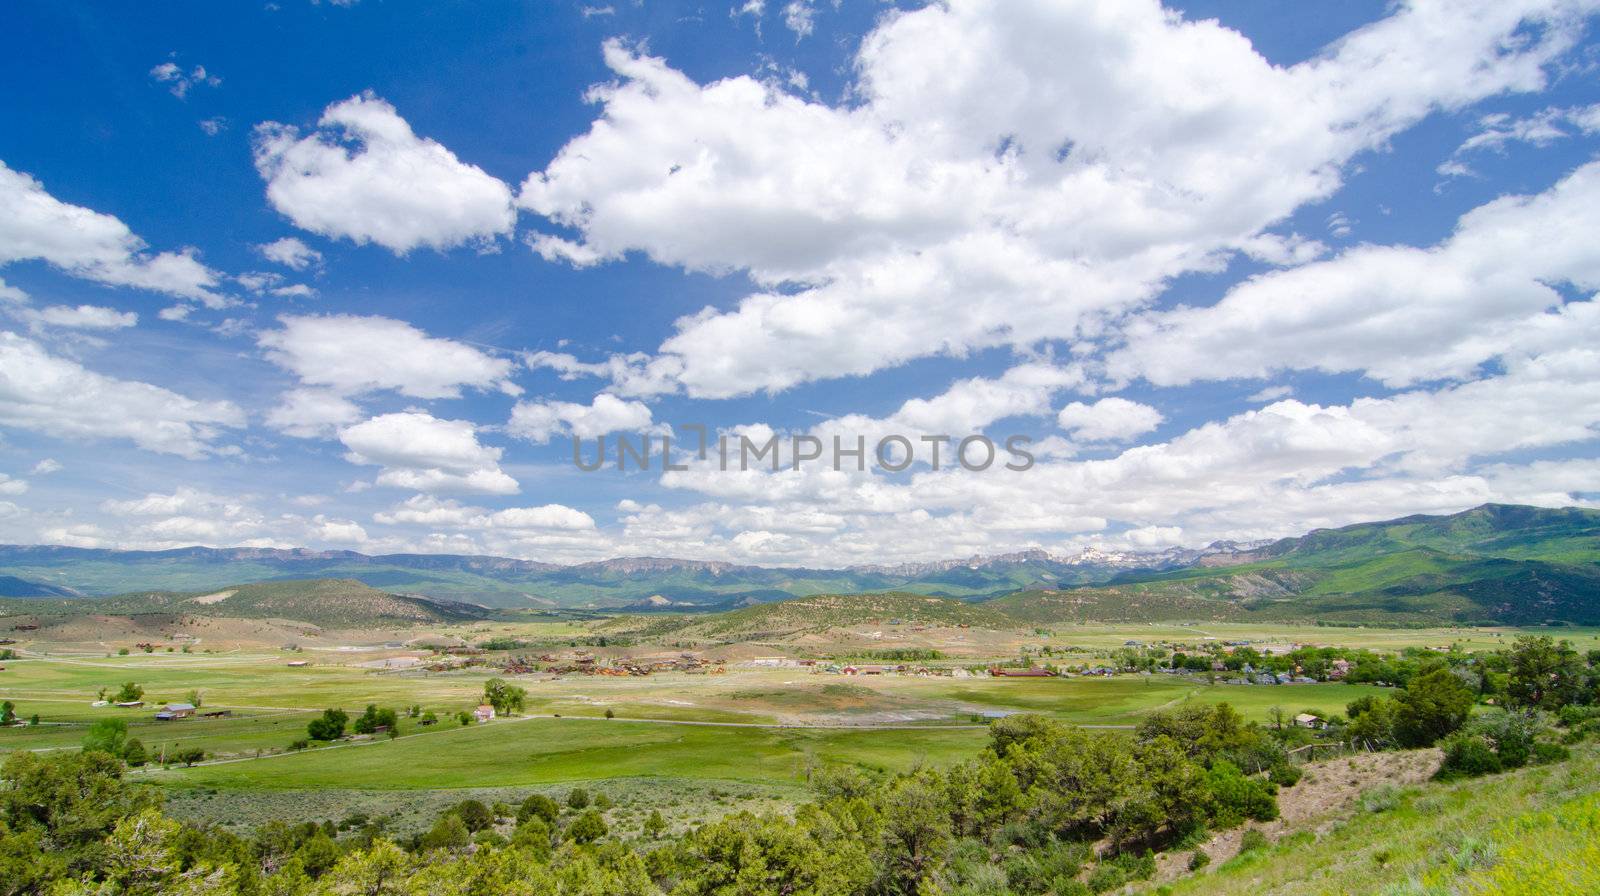 Rural Farming Valley in the Foothills of the San Juan Mountains in Colorado